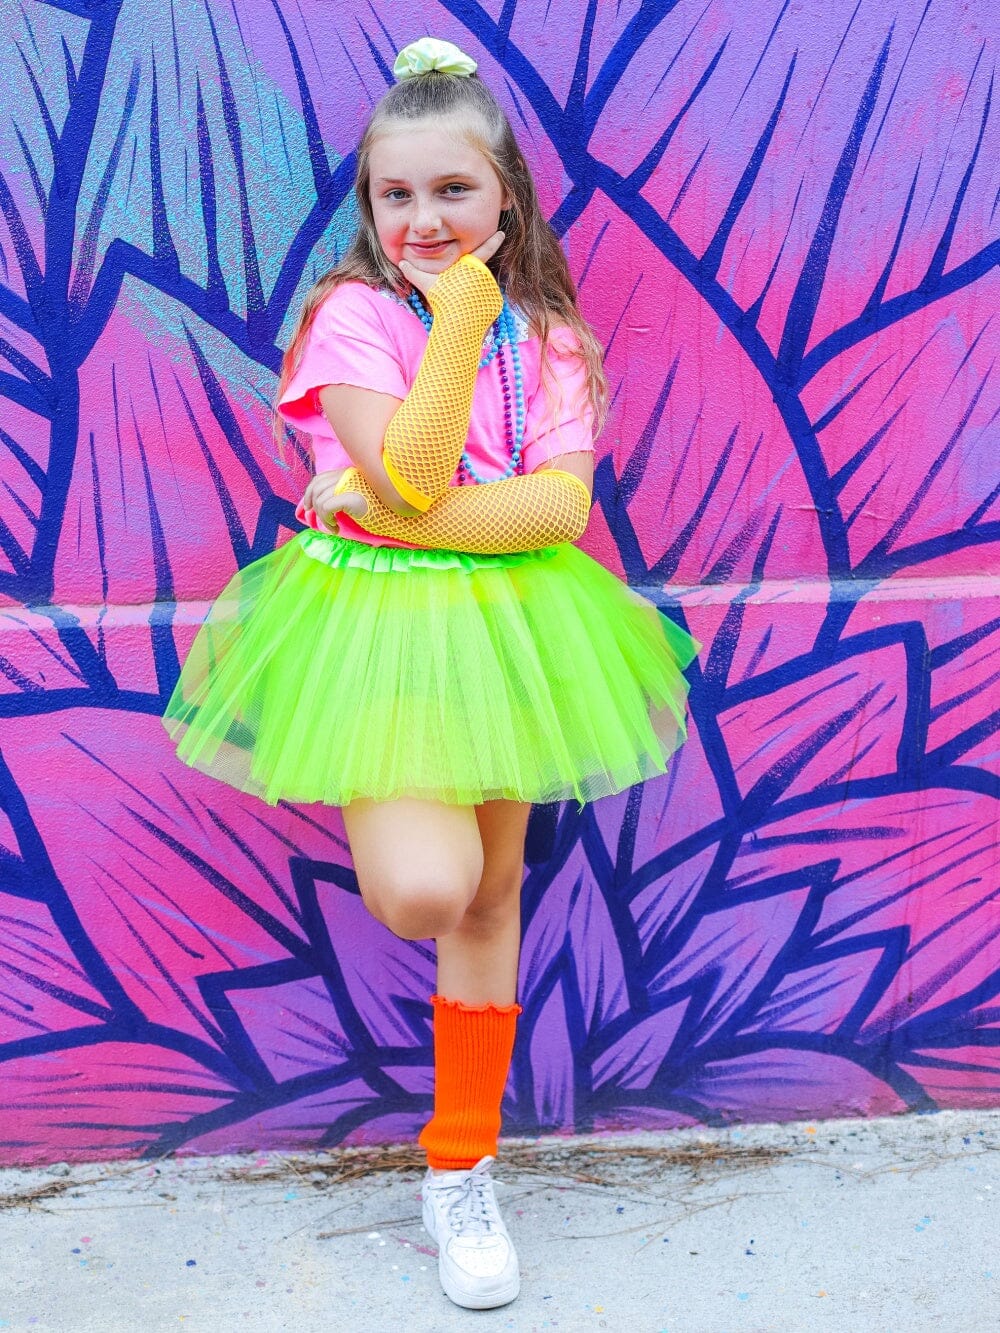 11 Best diy 80s costume ideas  80s costume, 80s party outfits